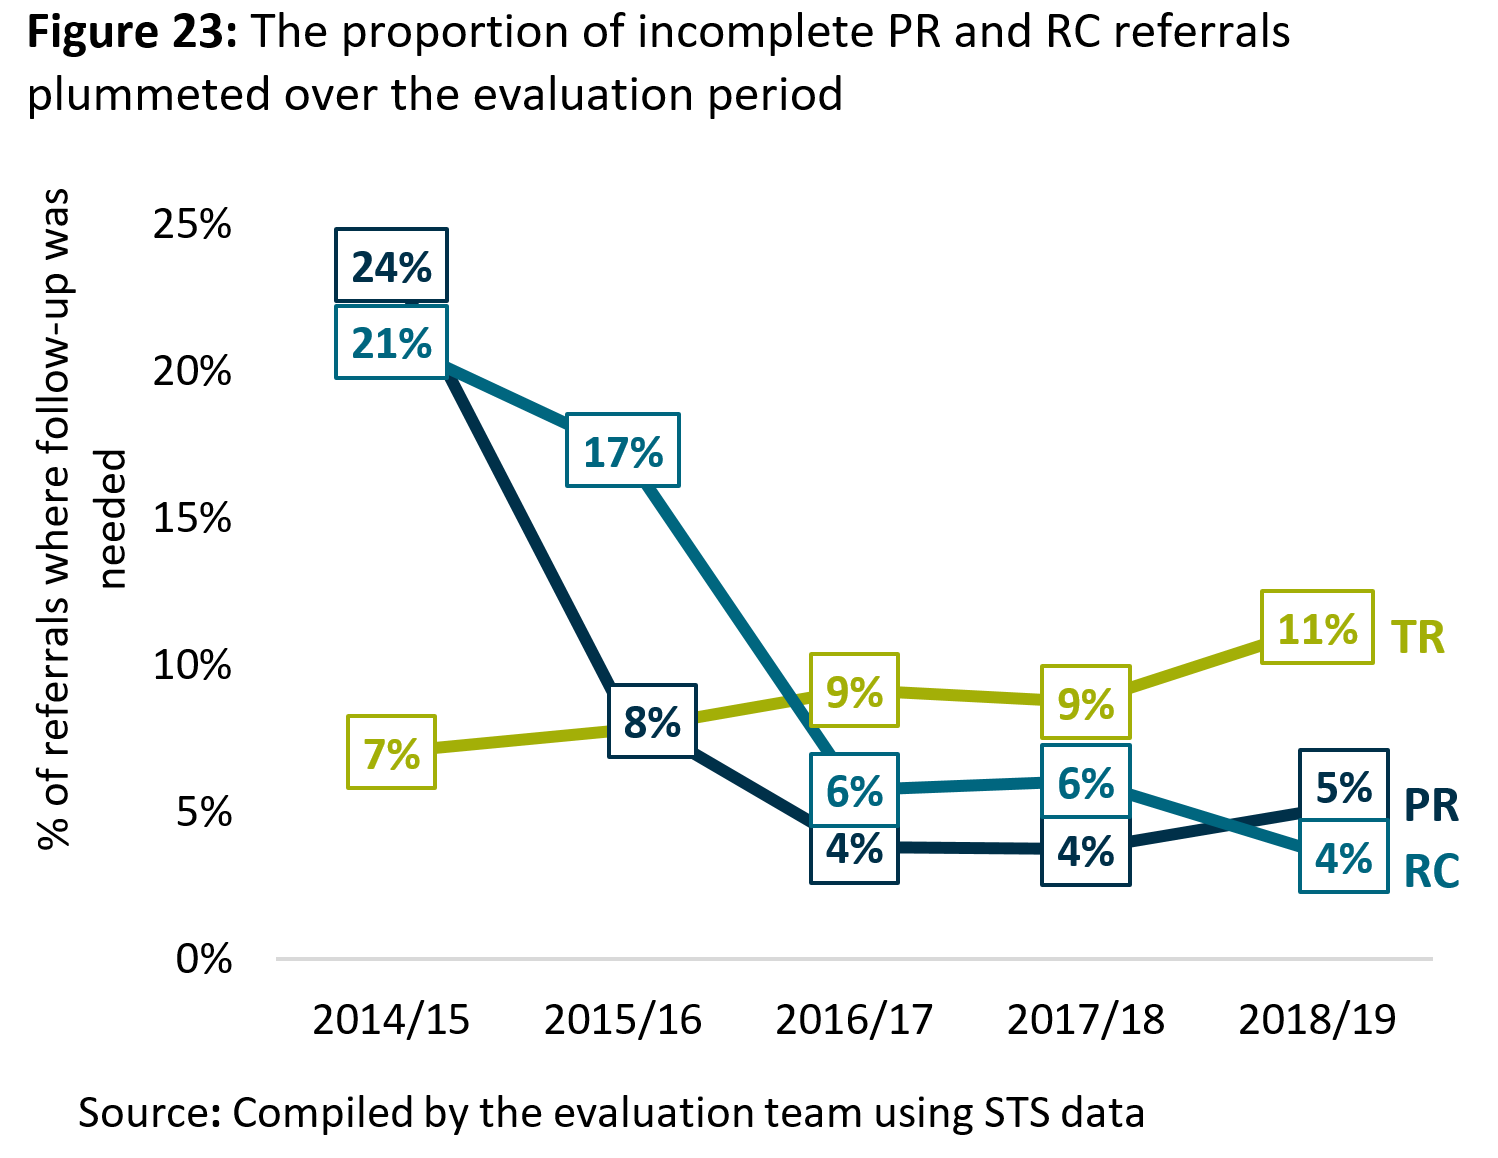 Figure 23: The proportion of incomplete <abbr>PR</abbr> and <abbr>RC</abbr> referrals plummeted over the evaluation period